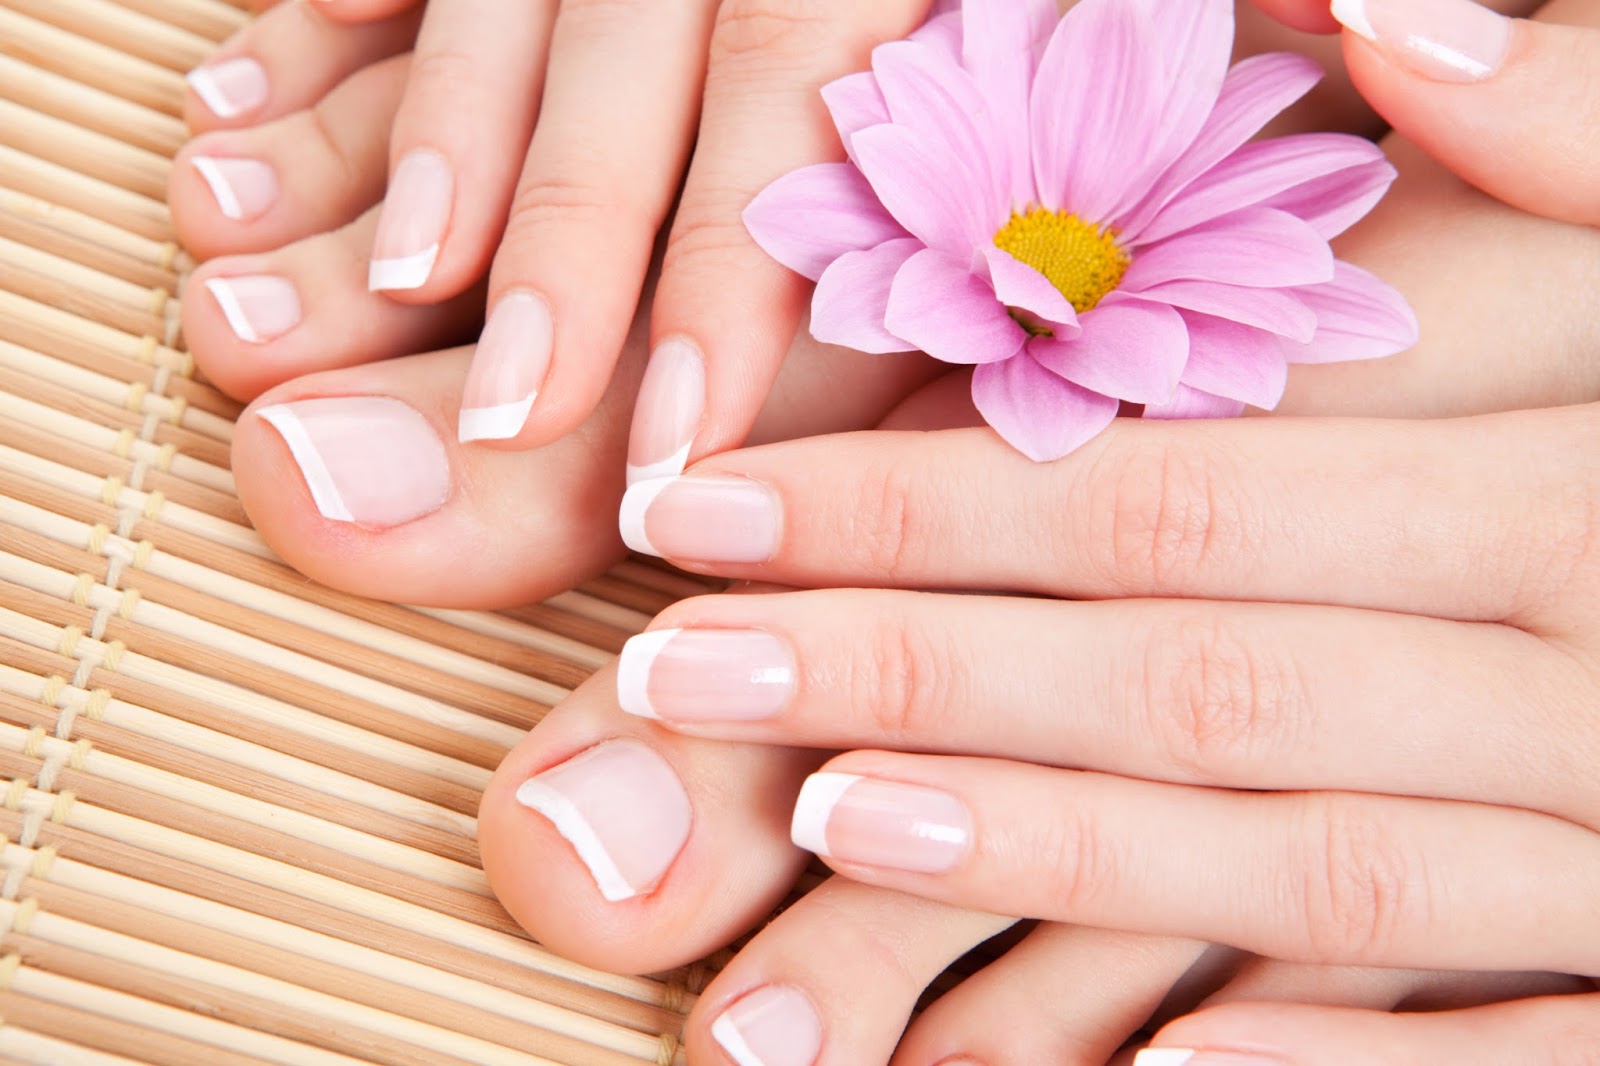 8. Nail Care Background Design Templates - wide 1